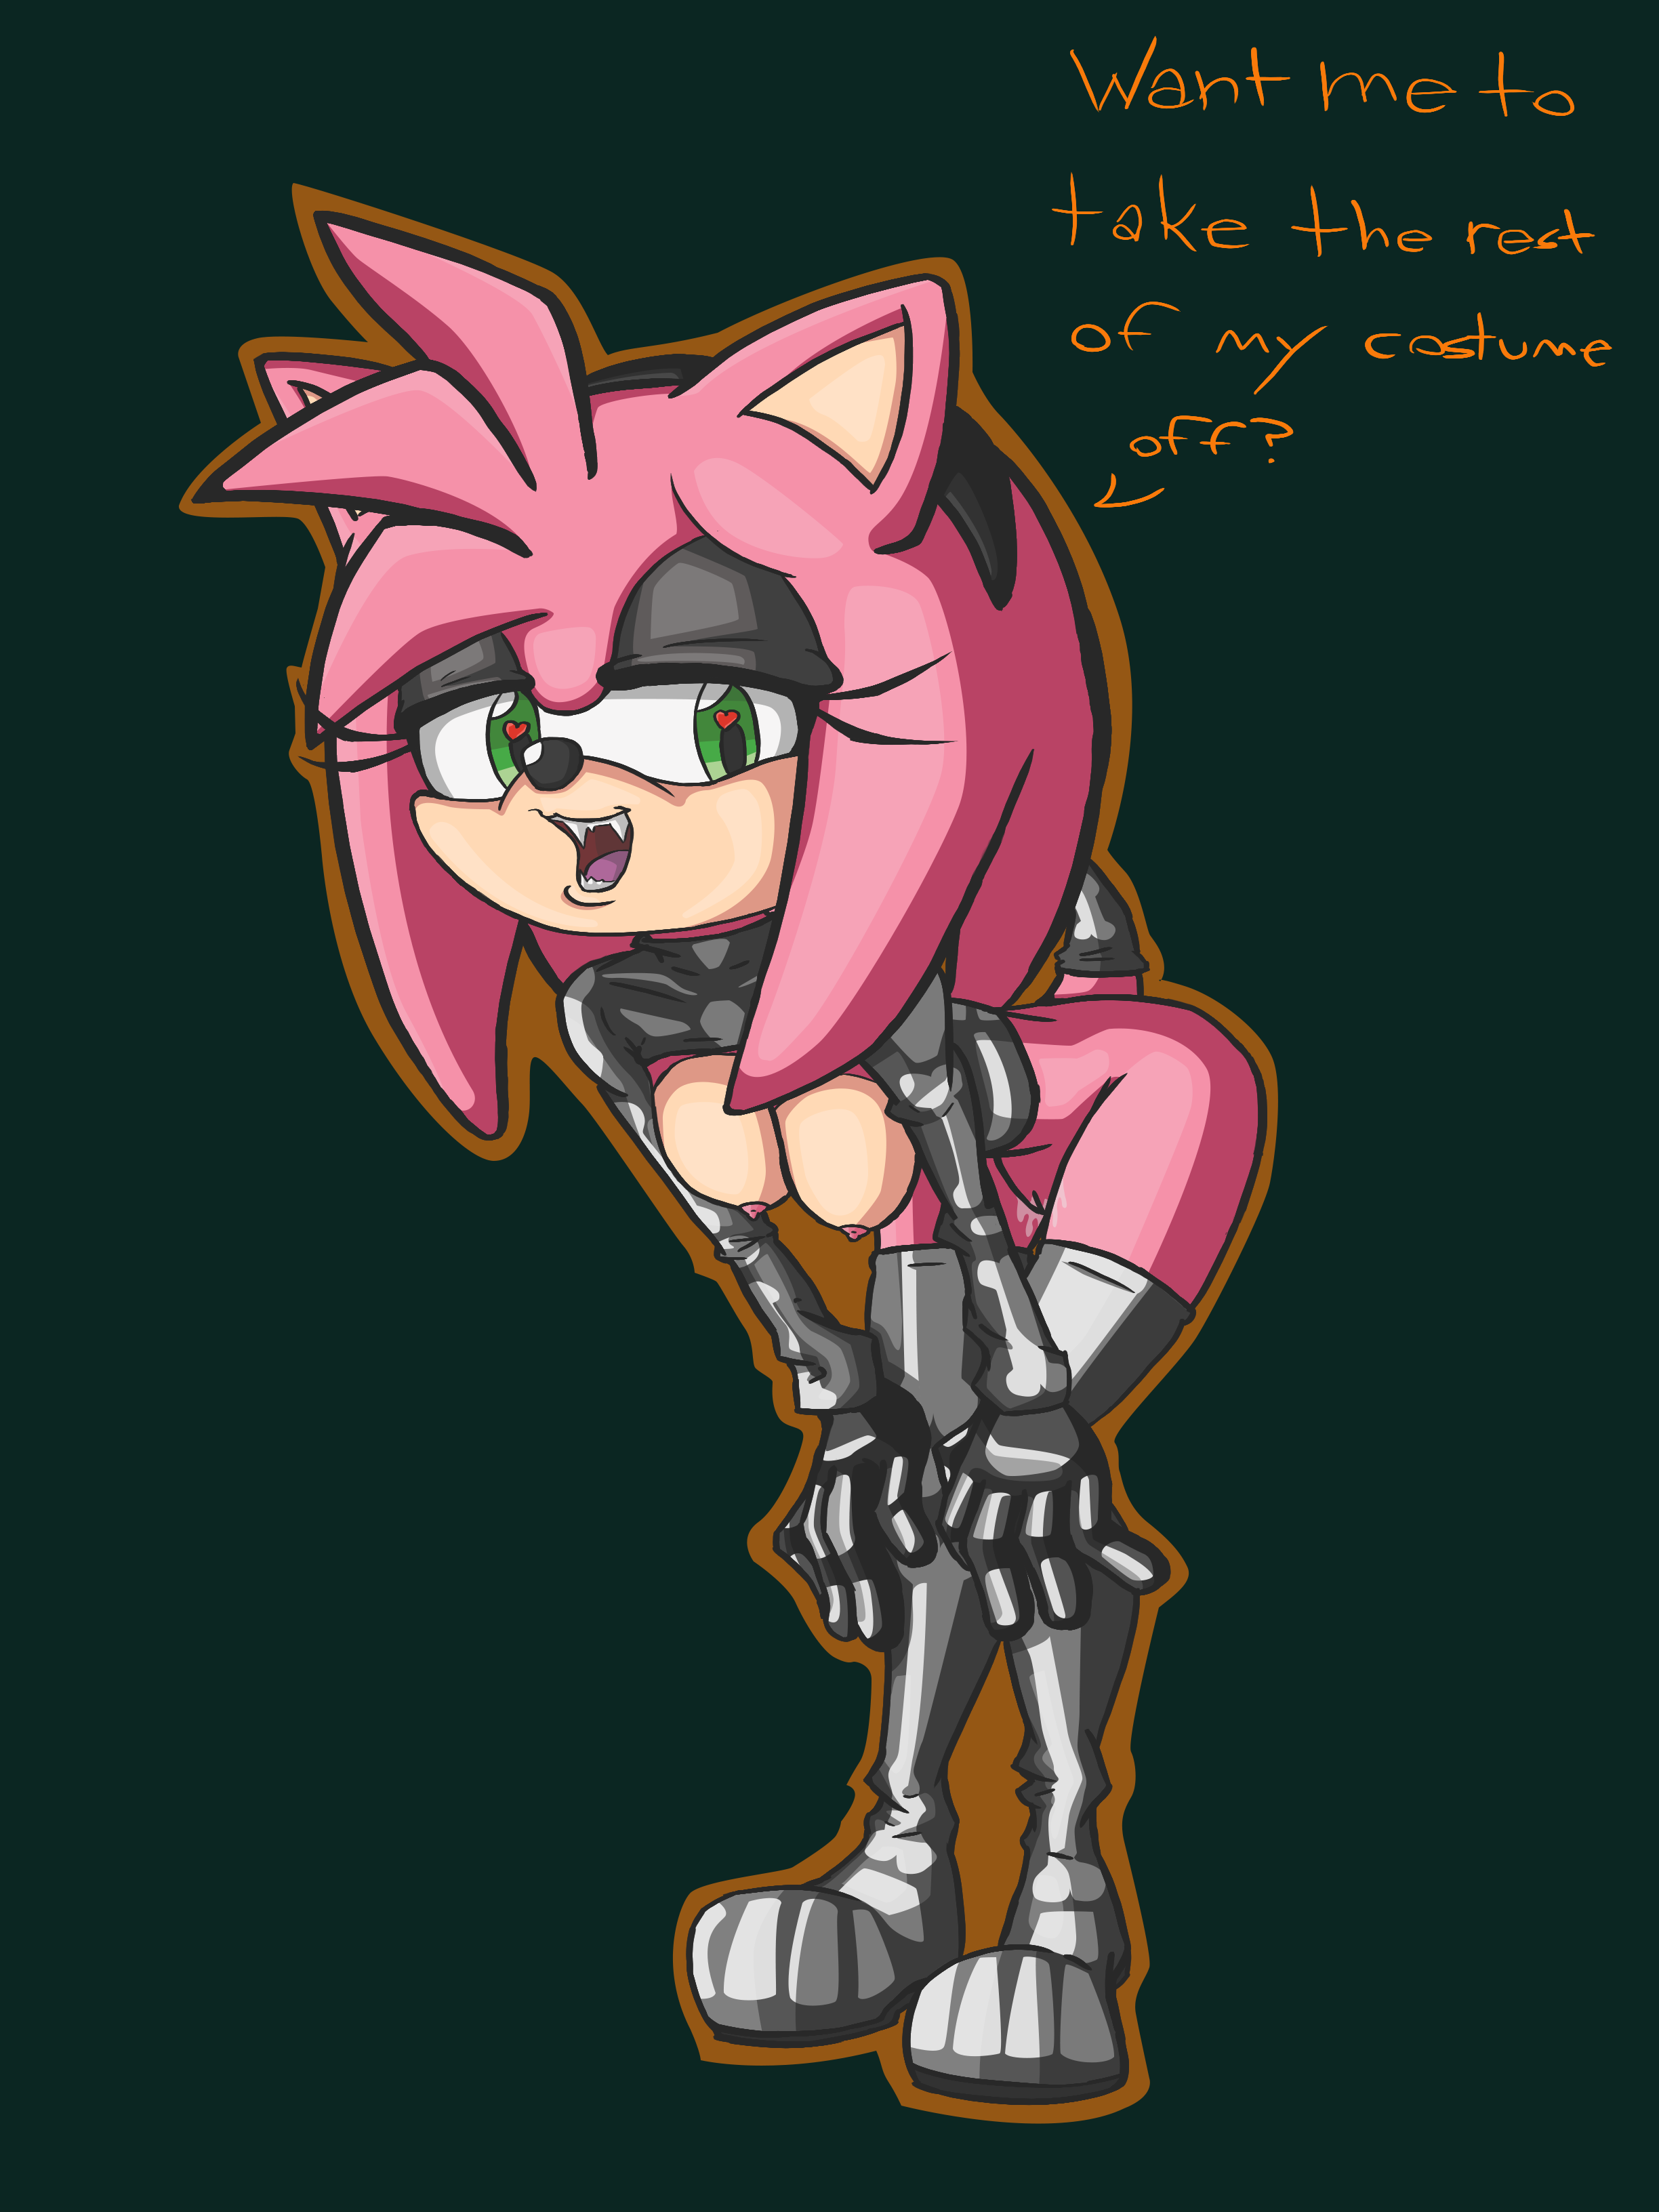 Adult amy rose costume